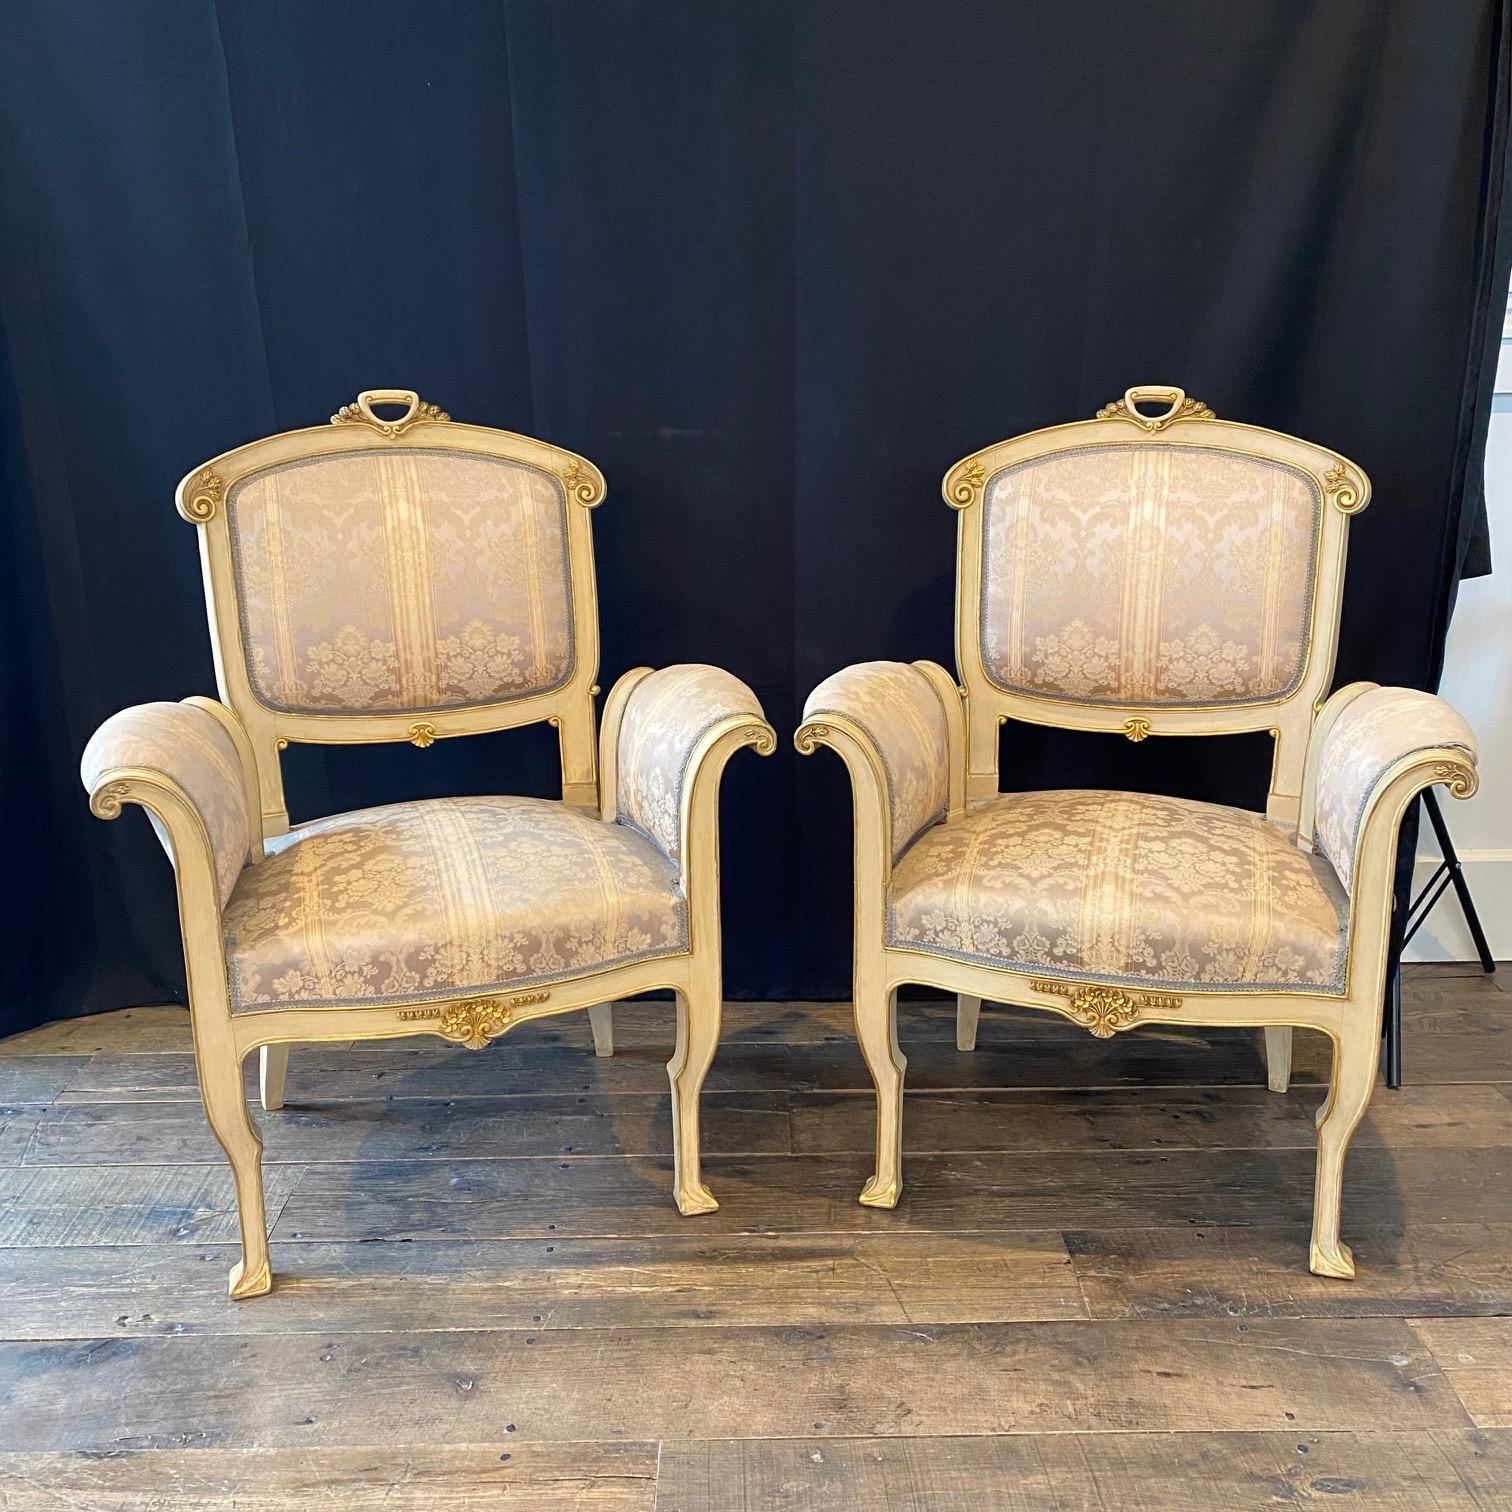 Pair of Italian Gold Gilt and Cream Art Nouveau Club Chairs with Footstools  In Good Condition For Sale In Hopewell, NJ